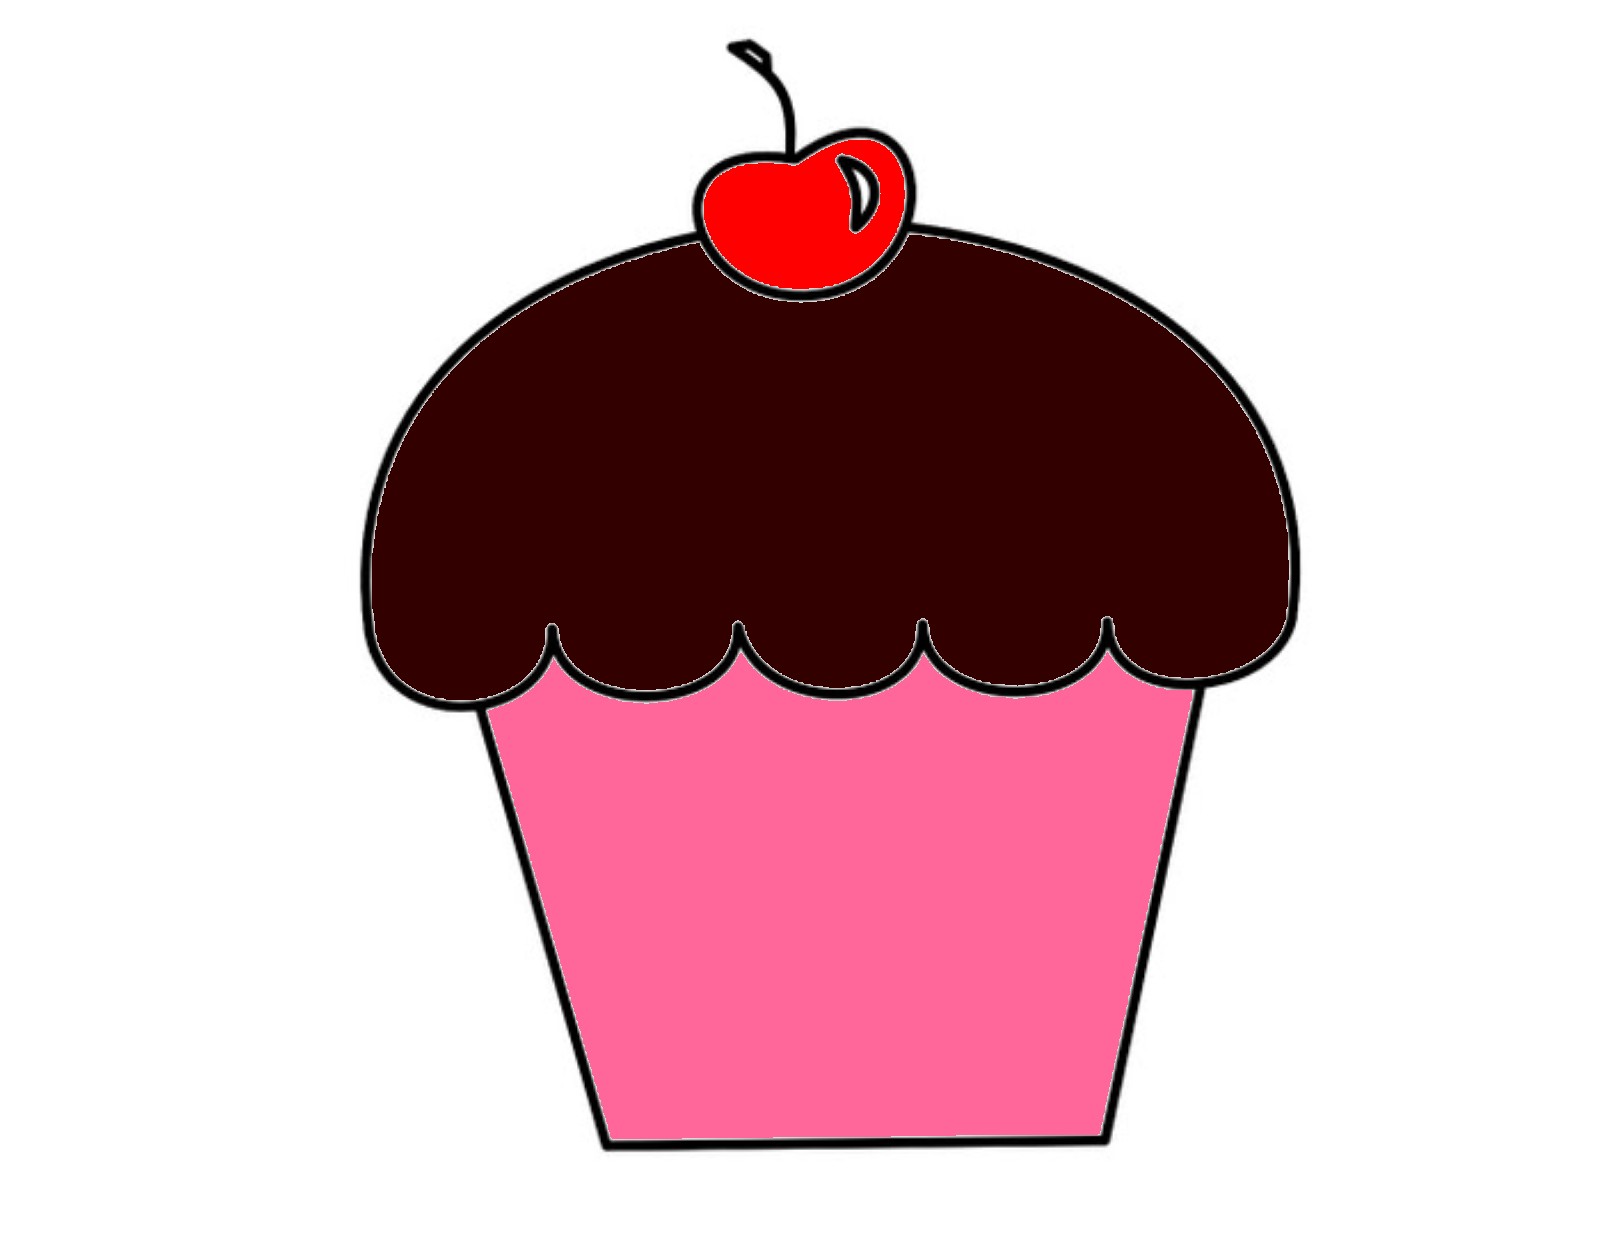 Cupcake   Free Images At Clker Com   Vector Clip Art Online Royalty